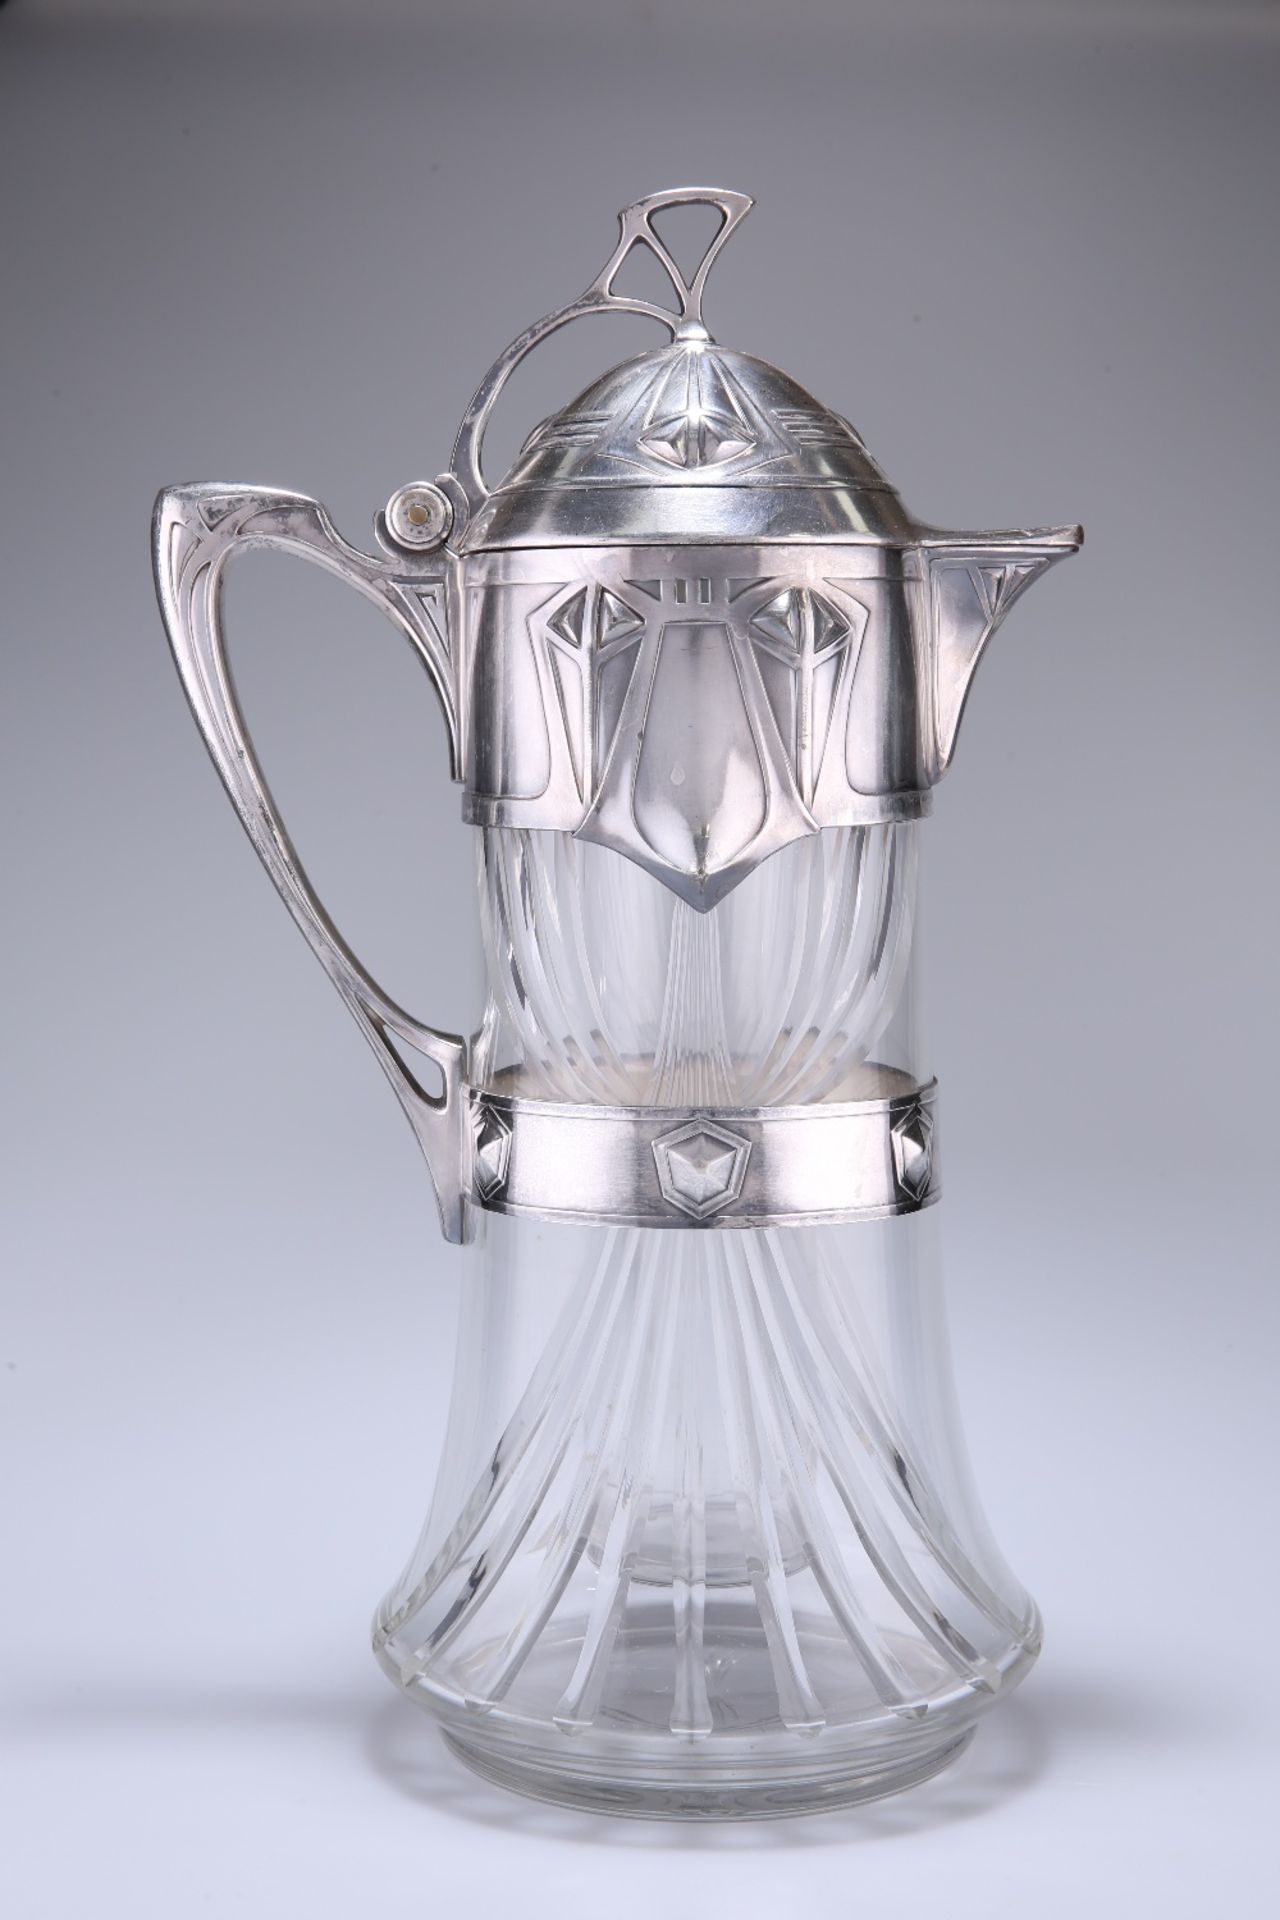 A LARGE JUGENDSTIL SILVER-PLATE MOUNTED CUT-GLASS ICED WATER JUG